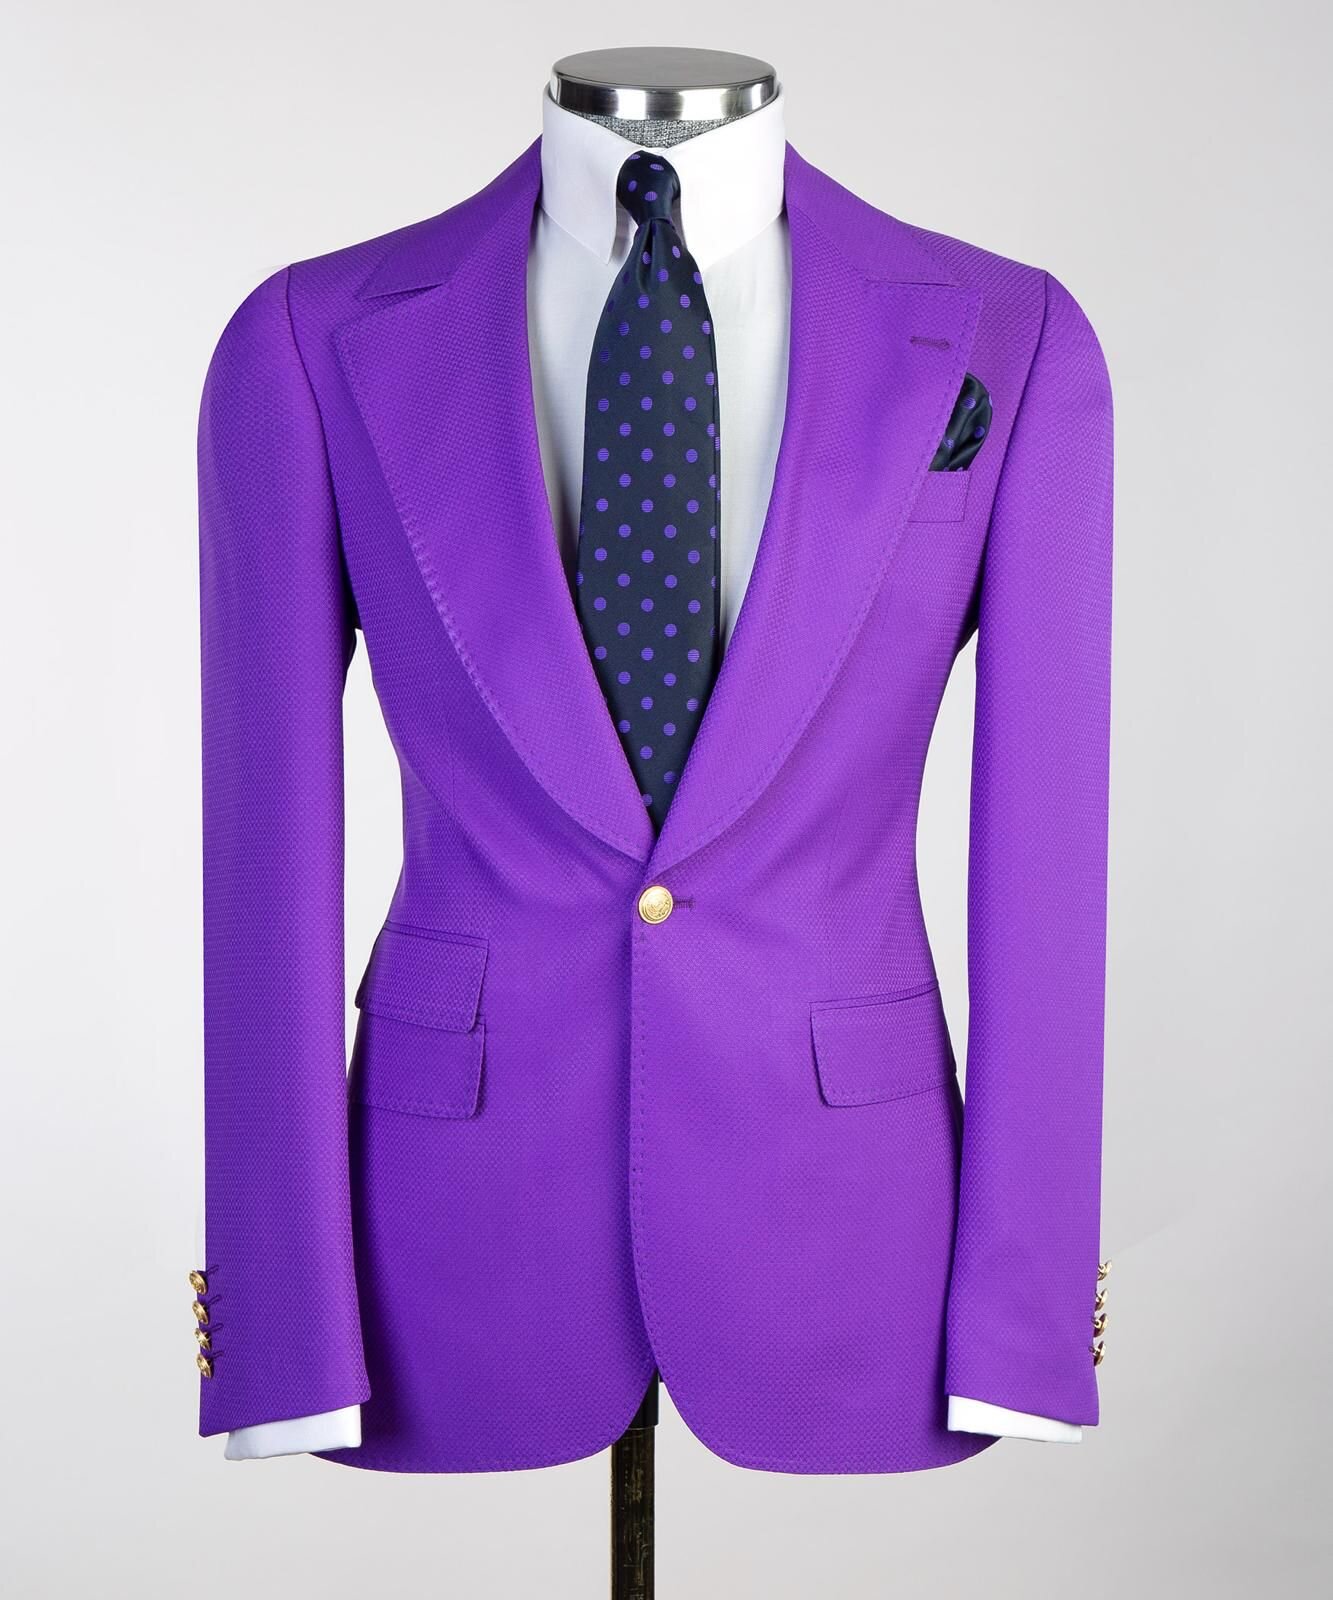 Shop — Luxe Suits by K.T. Bass